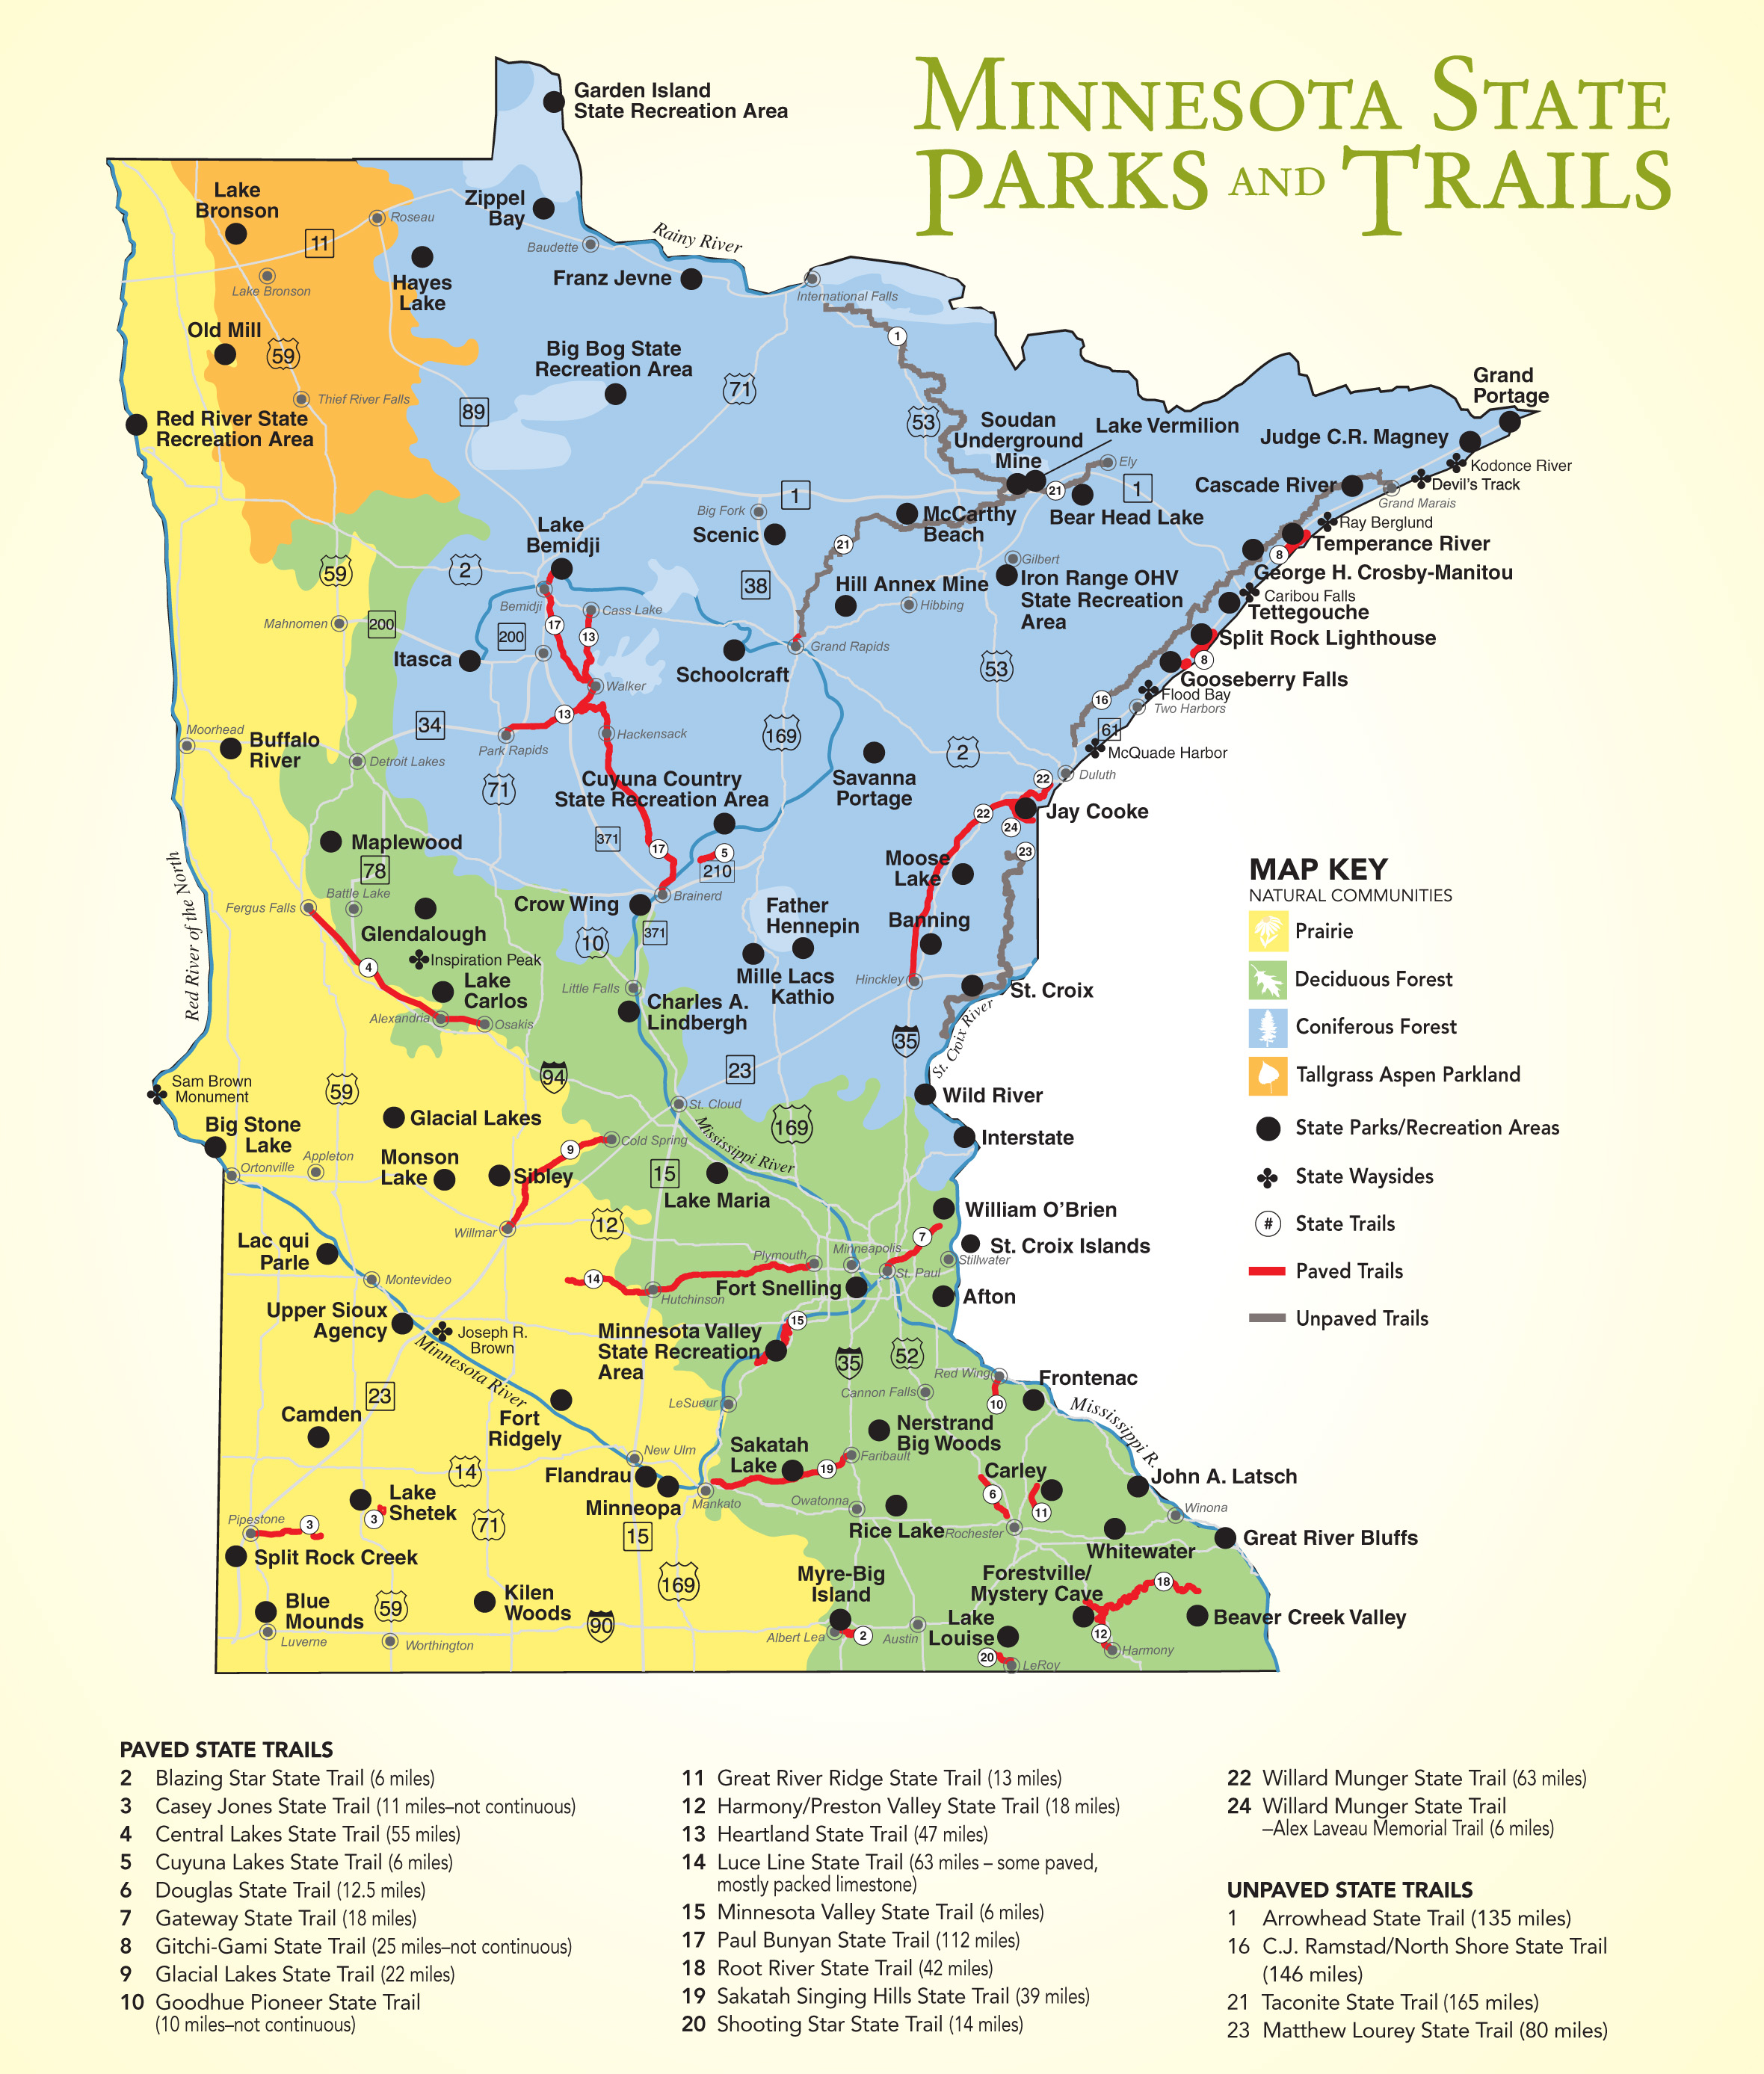 Minnesota State Parks and Trails map